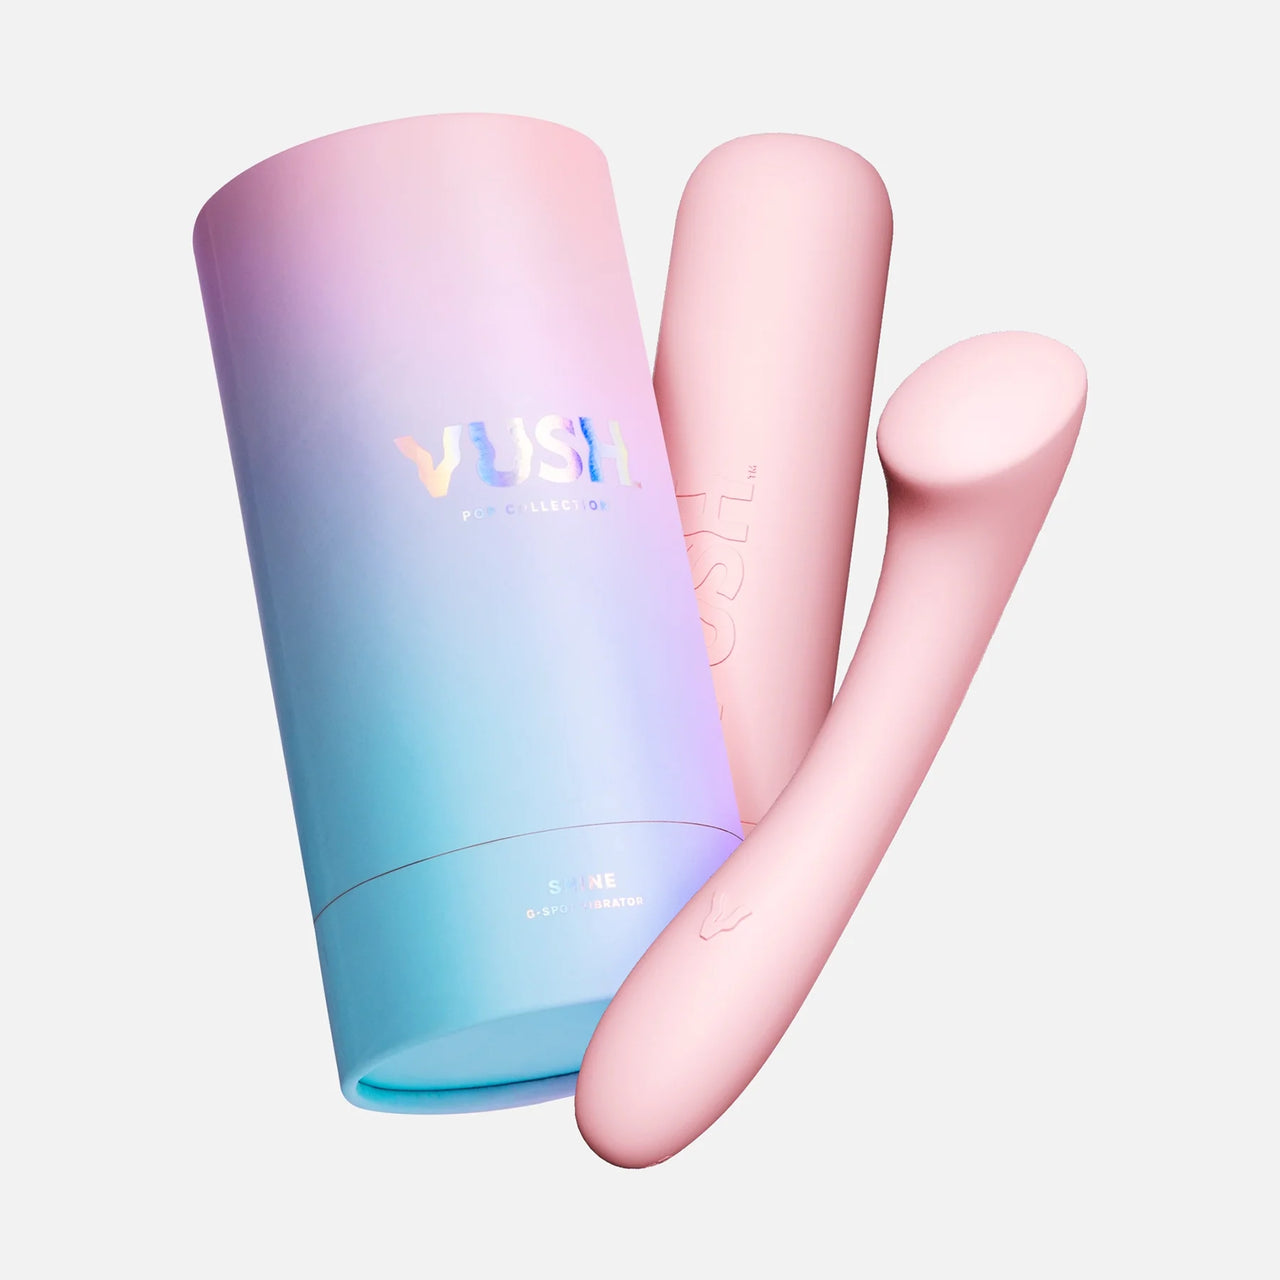 Vush Shine - Pop Collection - Pink Friday